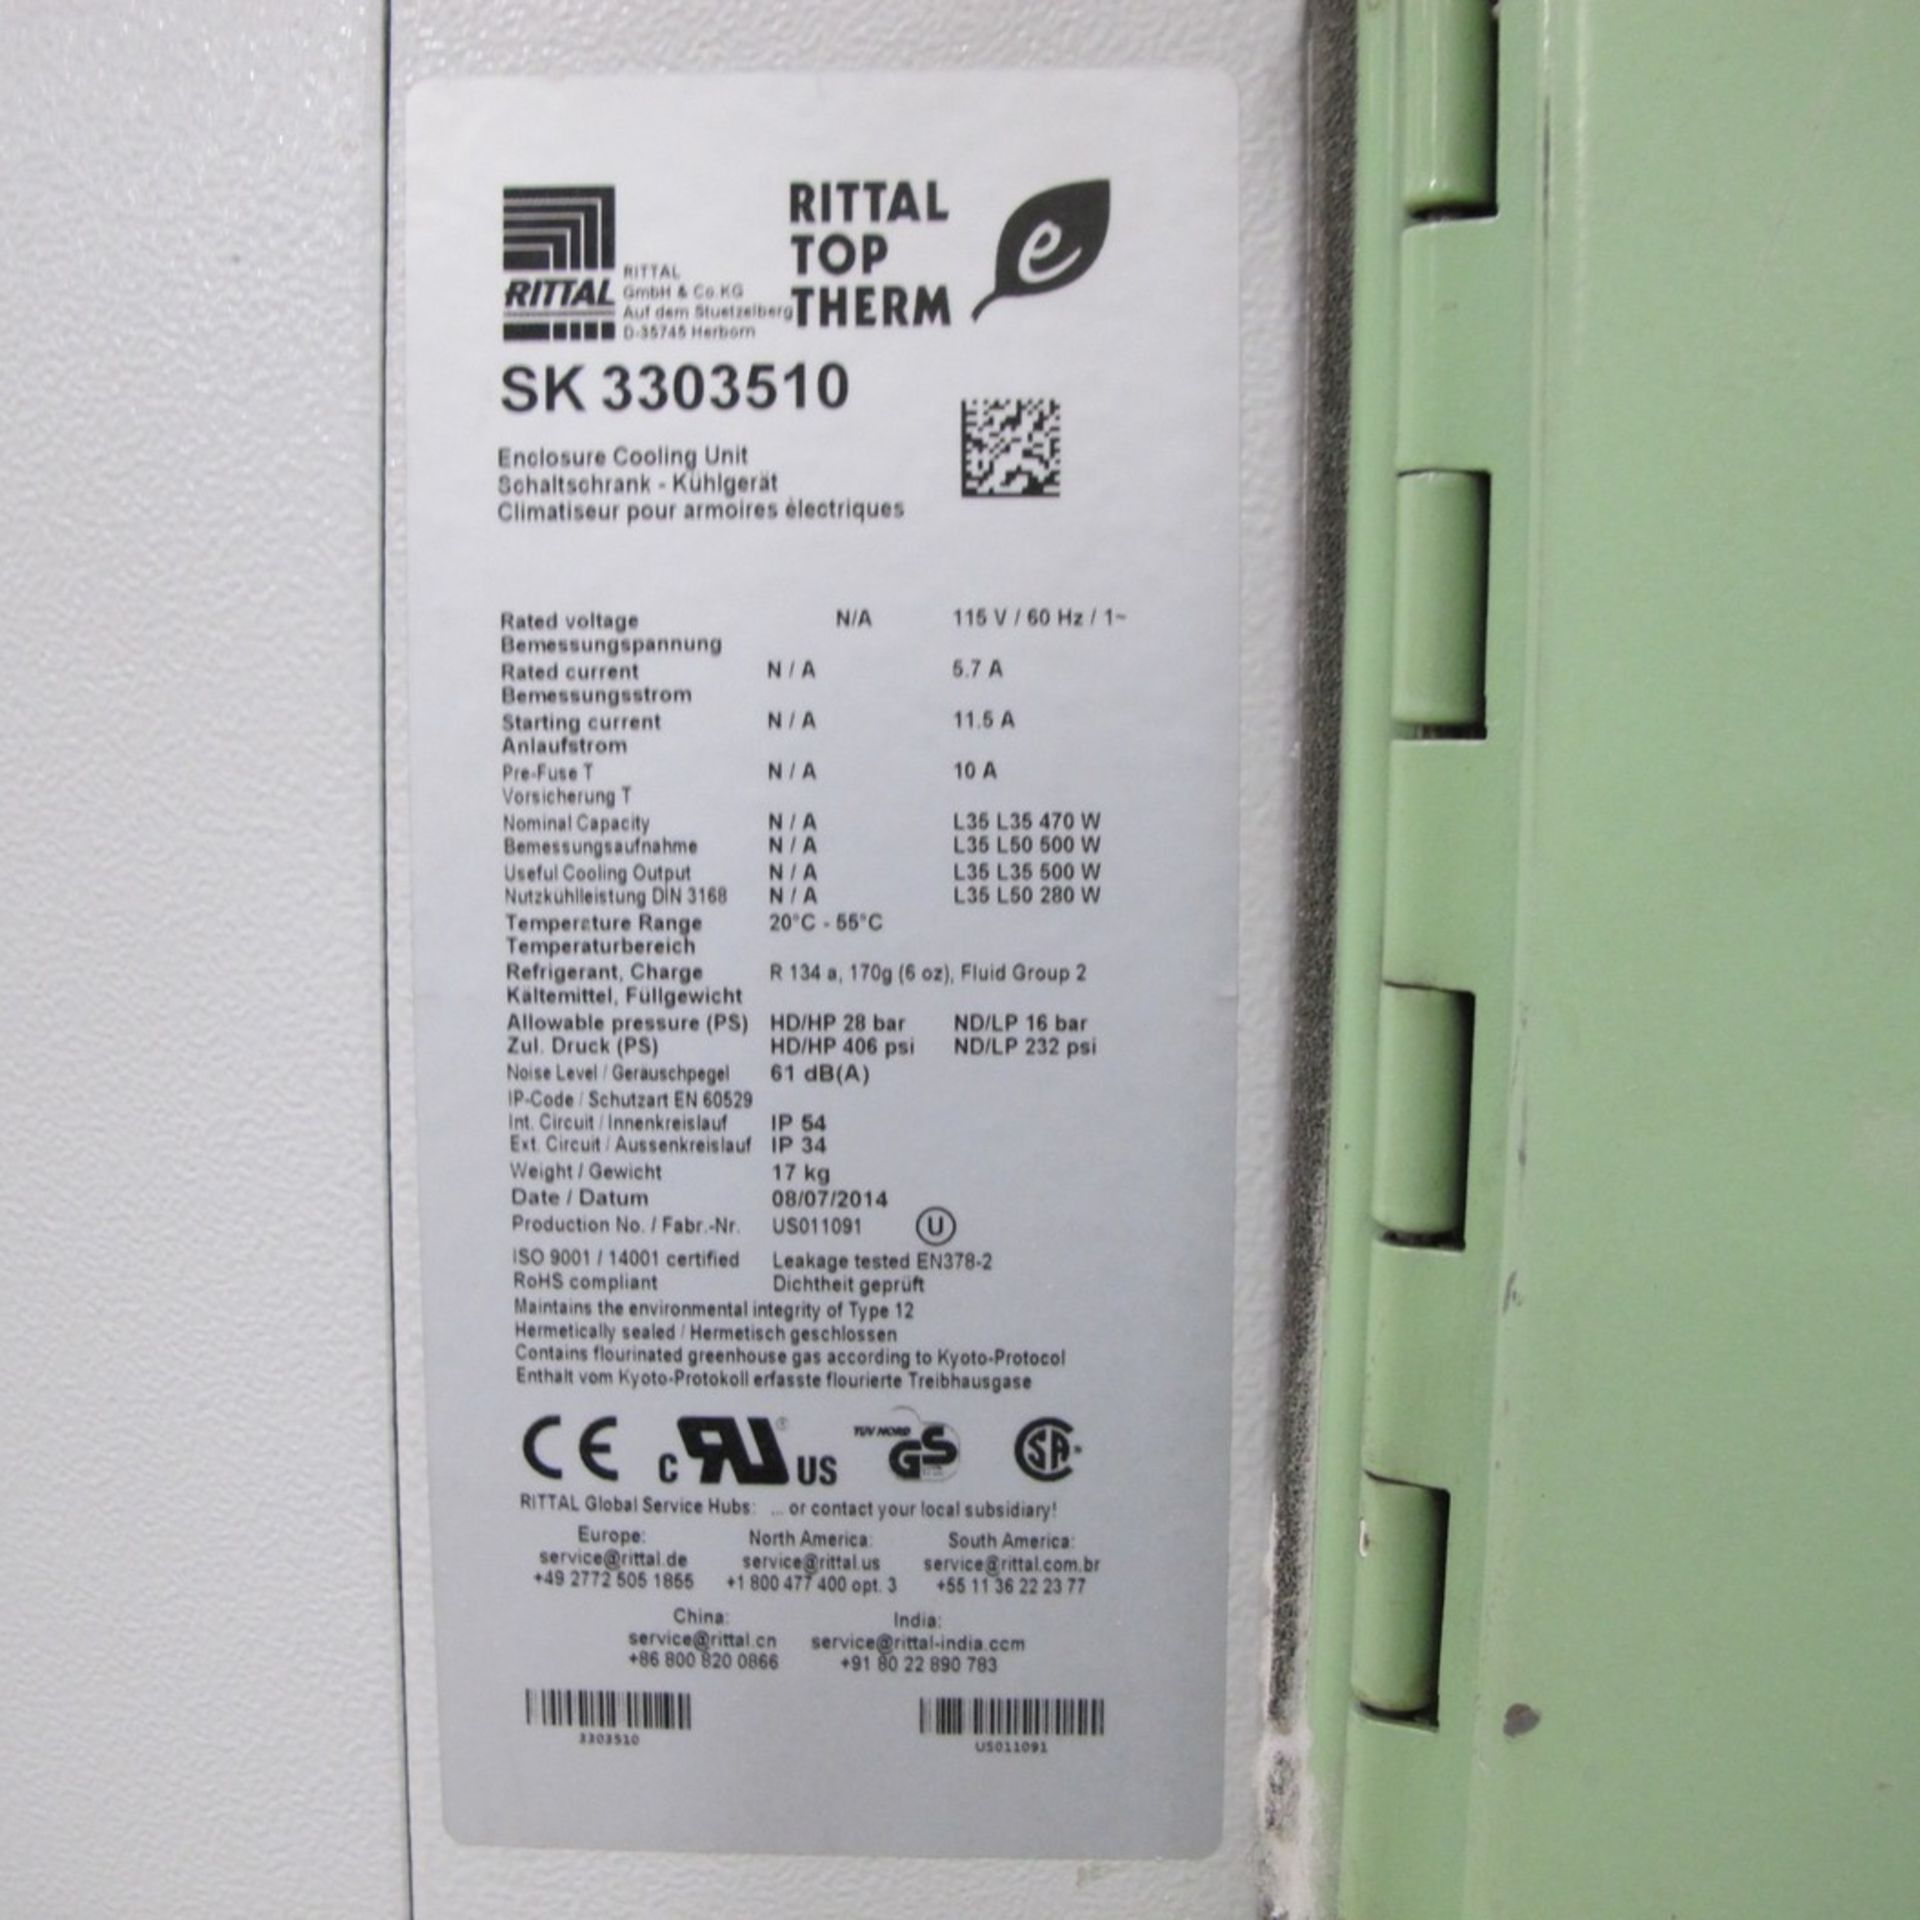 ELECTRICAL CONTROL CABINET W/ INDRAMAT SERVO CONTROLLERS AND RITTAL COOLING UNIT (BATH B4) - Image 3 of 5